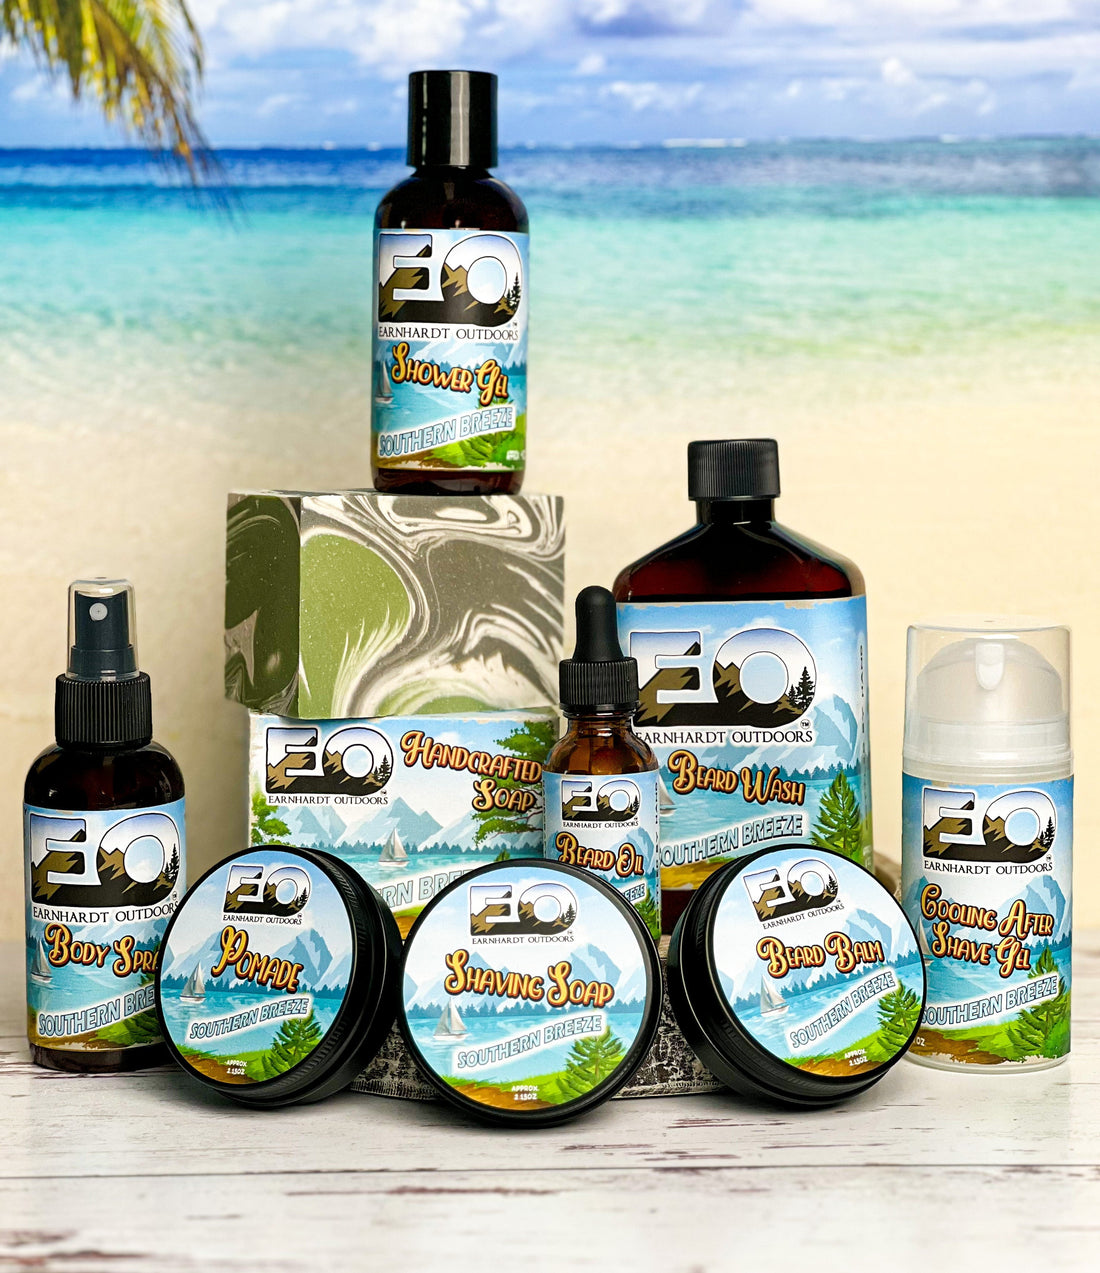 Southern Breeze Earnhardt Outdoors Body Spray - Old Town Soap Co.